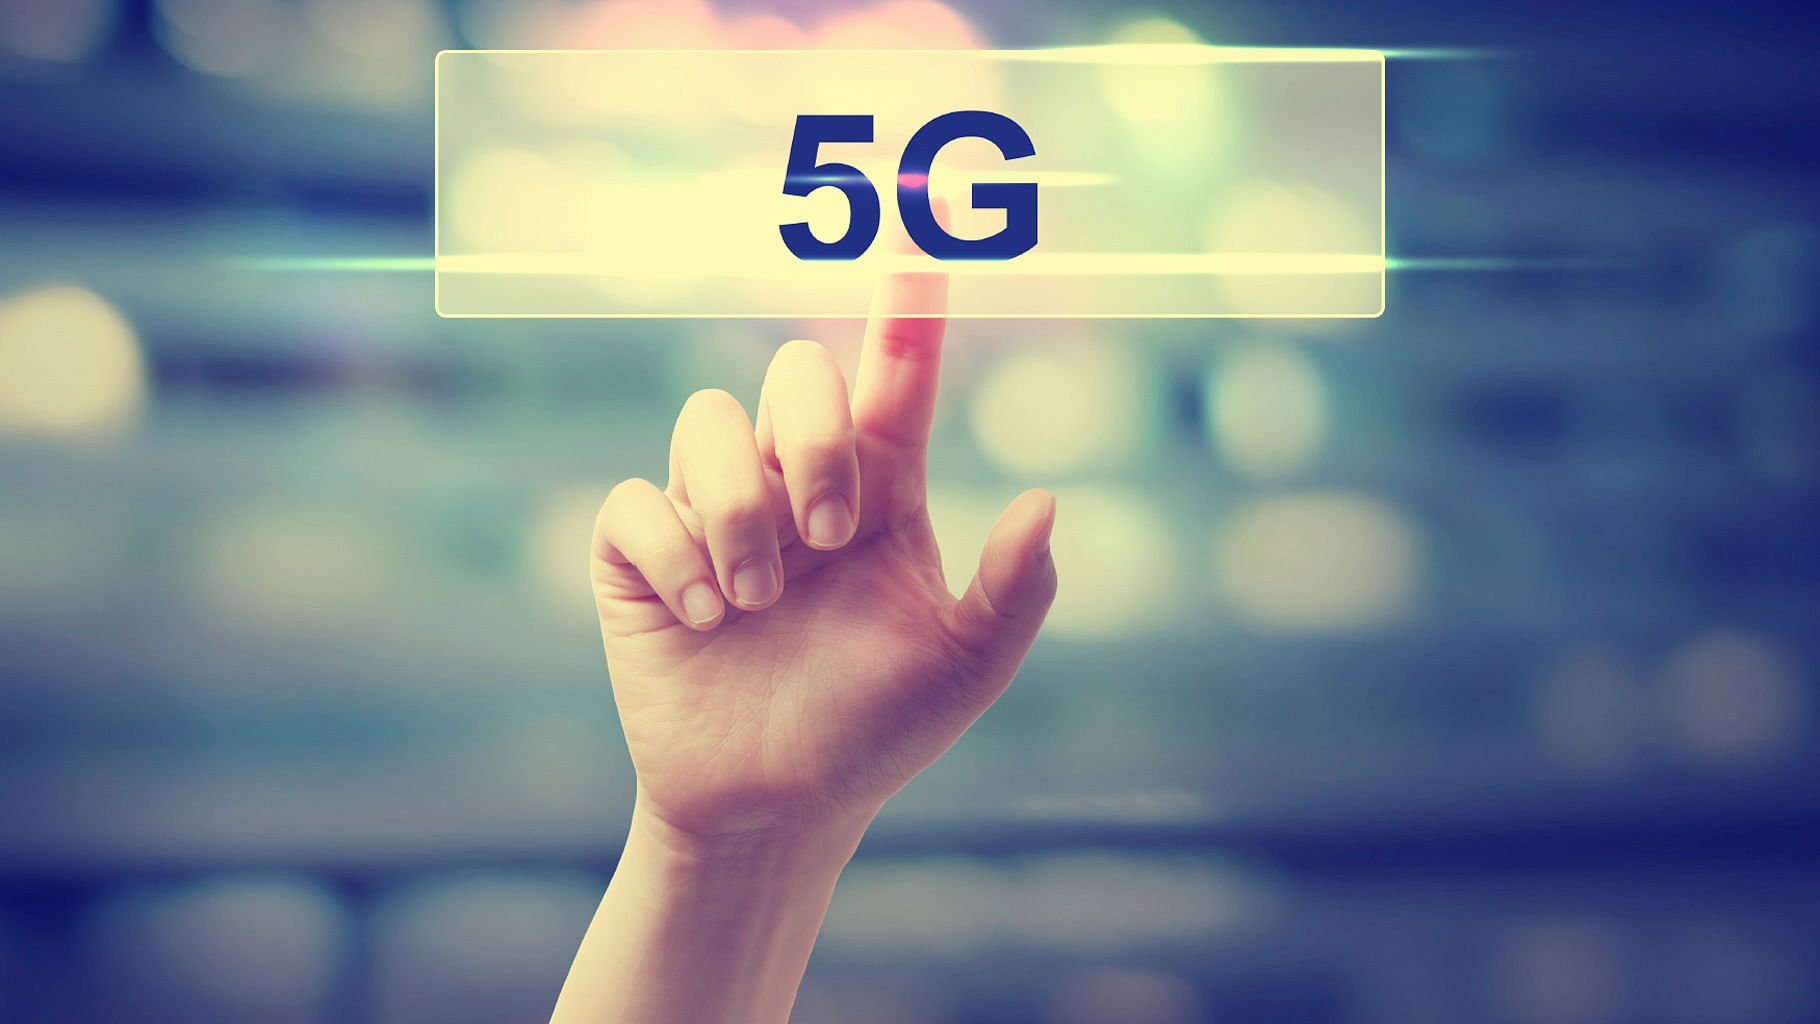 Are we ready for 5G already? (Photo: iStock)